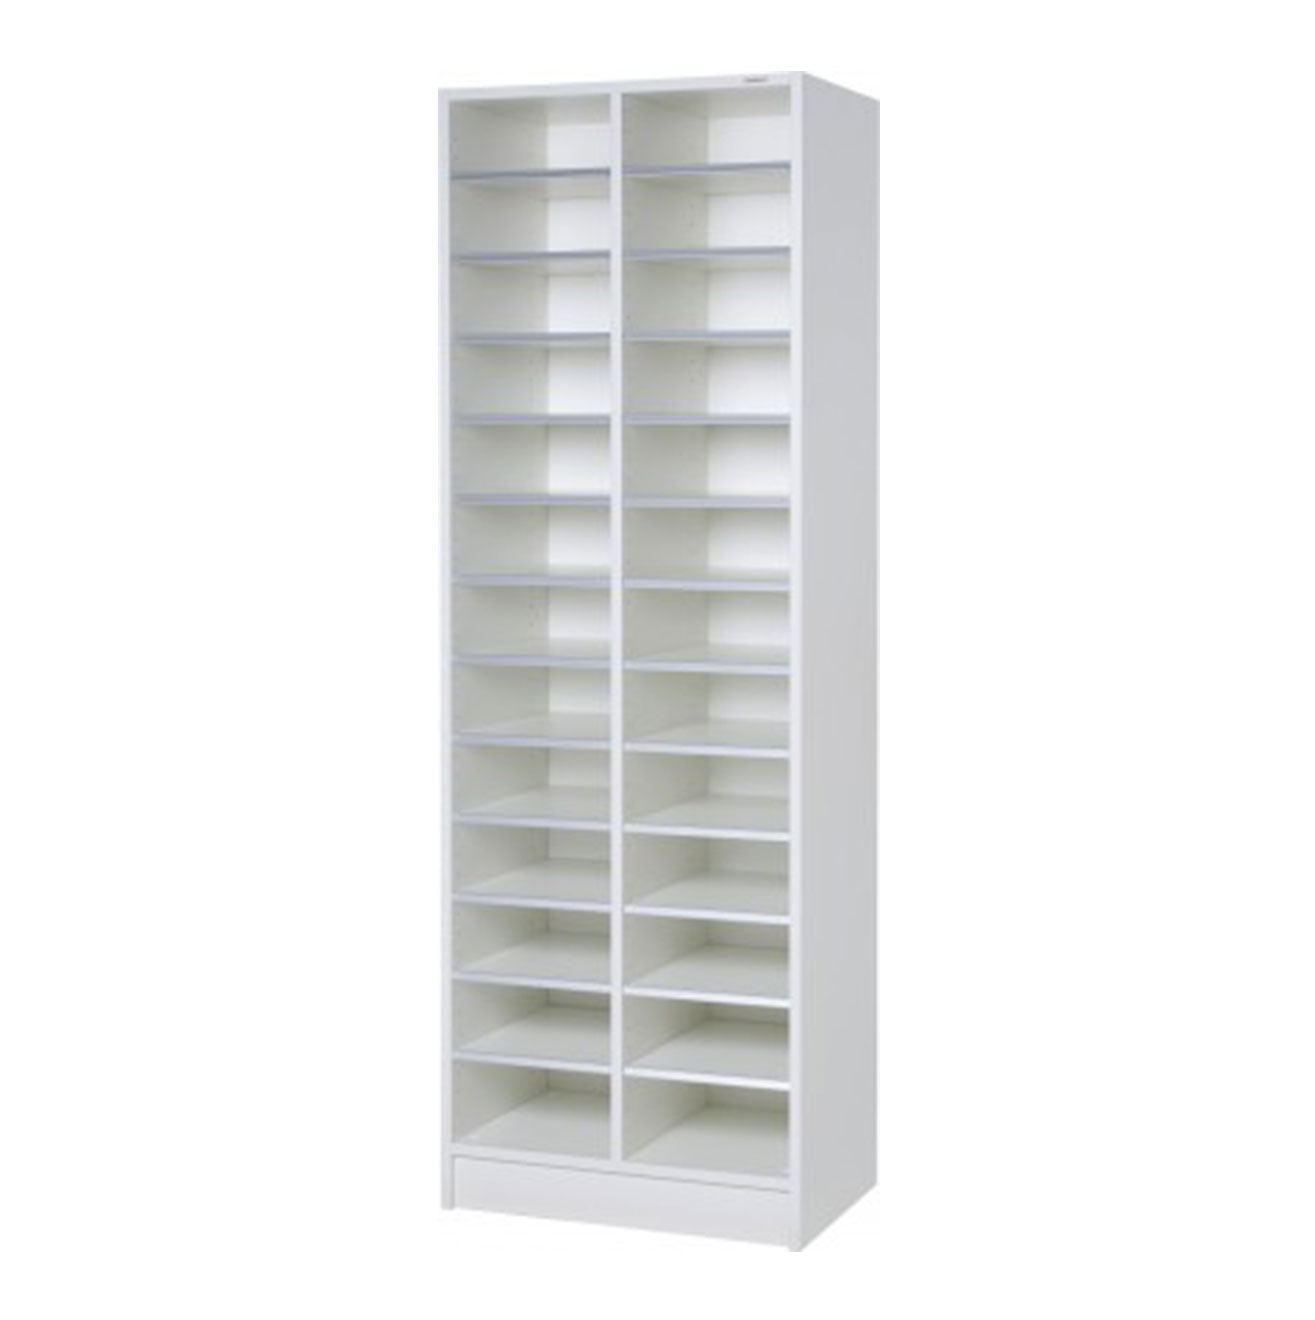 Double Pigeon Hole Cabinet - White